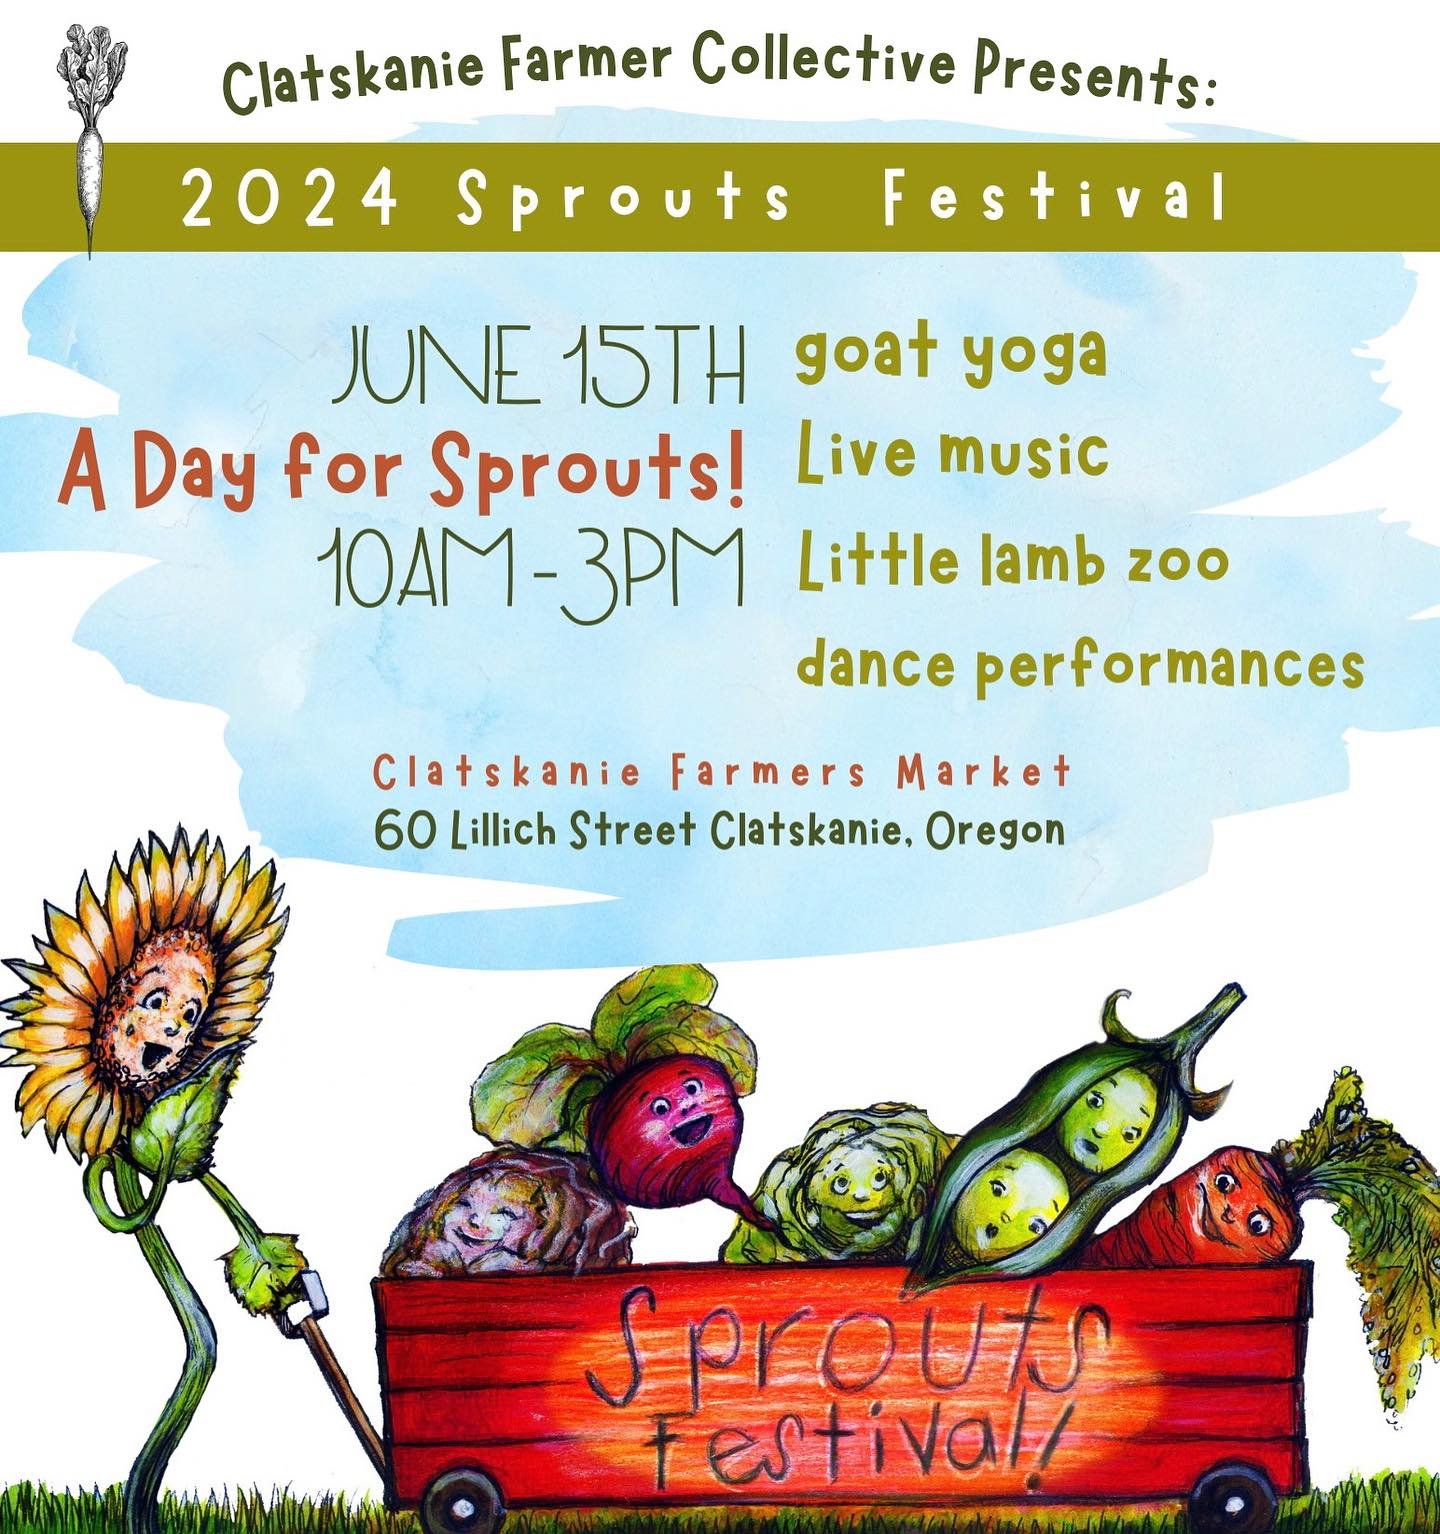 Sprouts Festival on June 15th from 10am - 3pm will feature a bummer lamb petting area hosted by Big River Farms, goat yoga, Reach for the Stars dance performances and lots of great educational kids activities! 

Live music, food trucks, many local ve